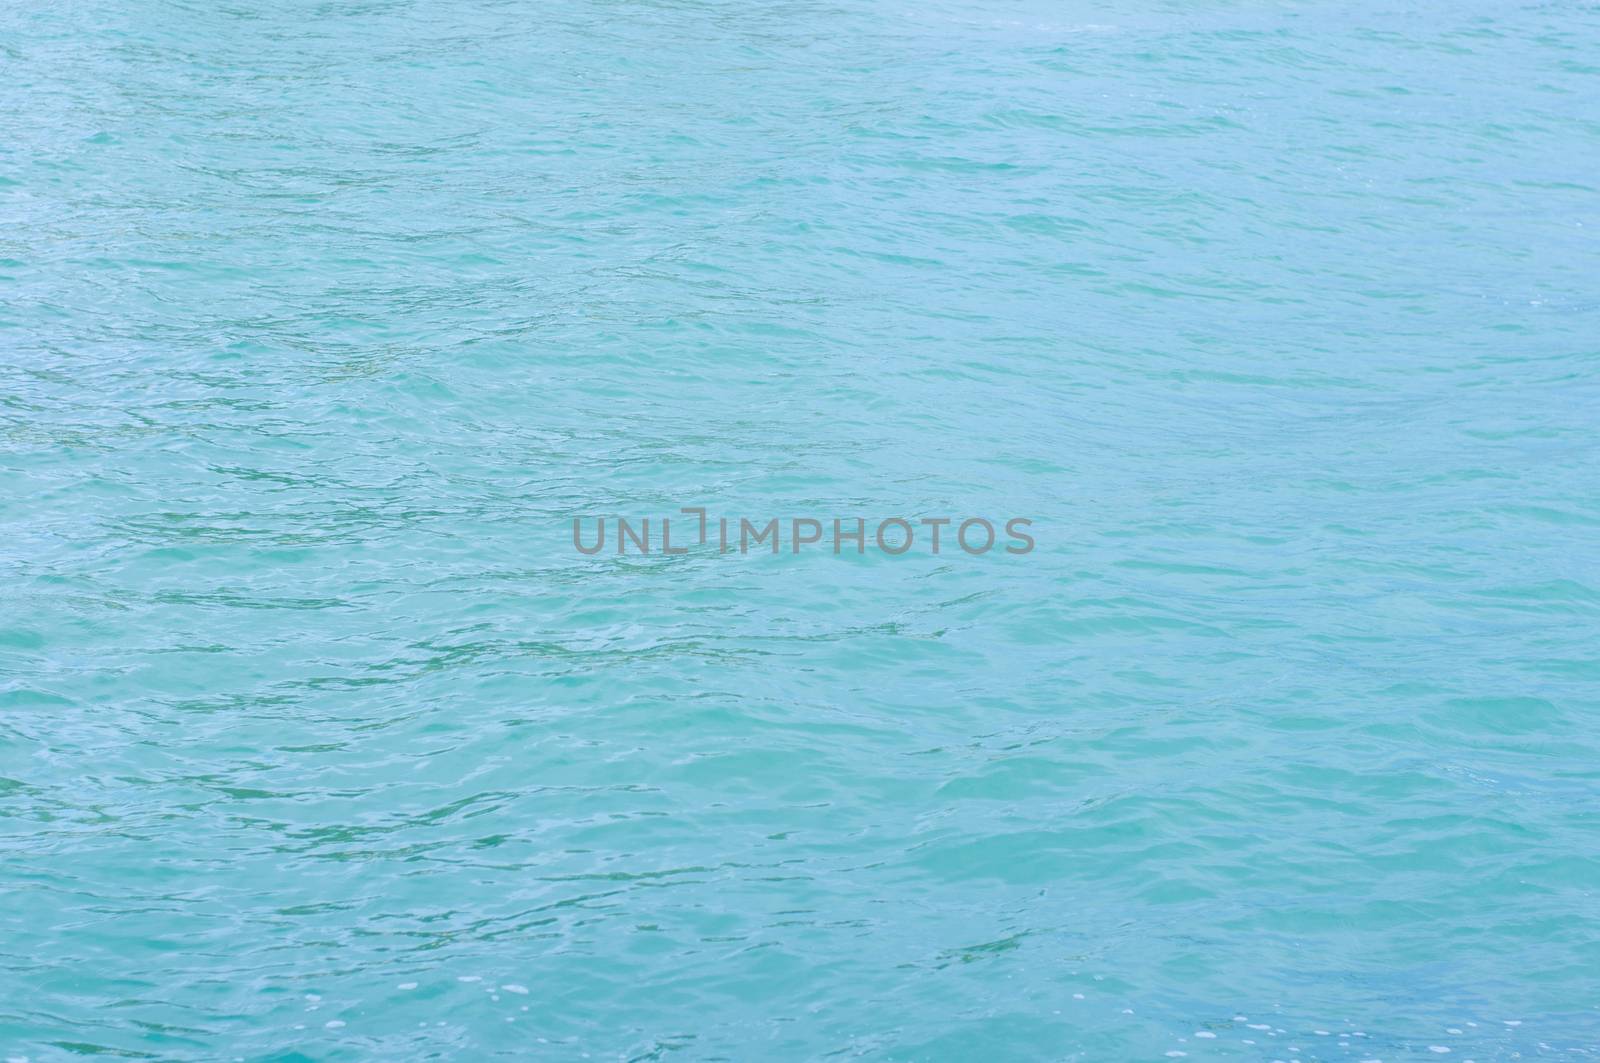 Background the sea water surface and texture